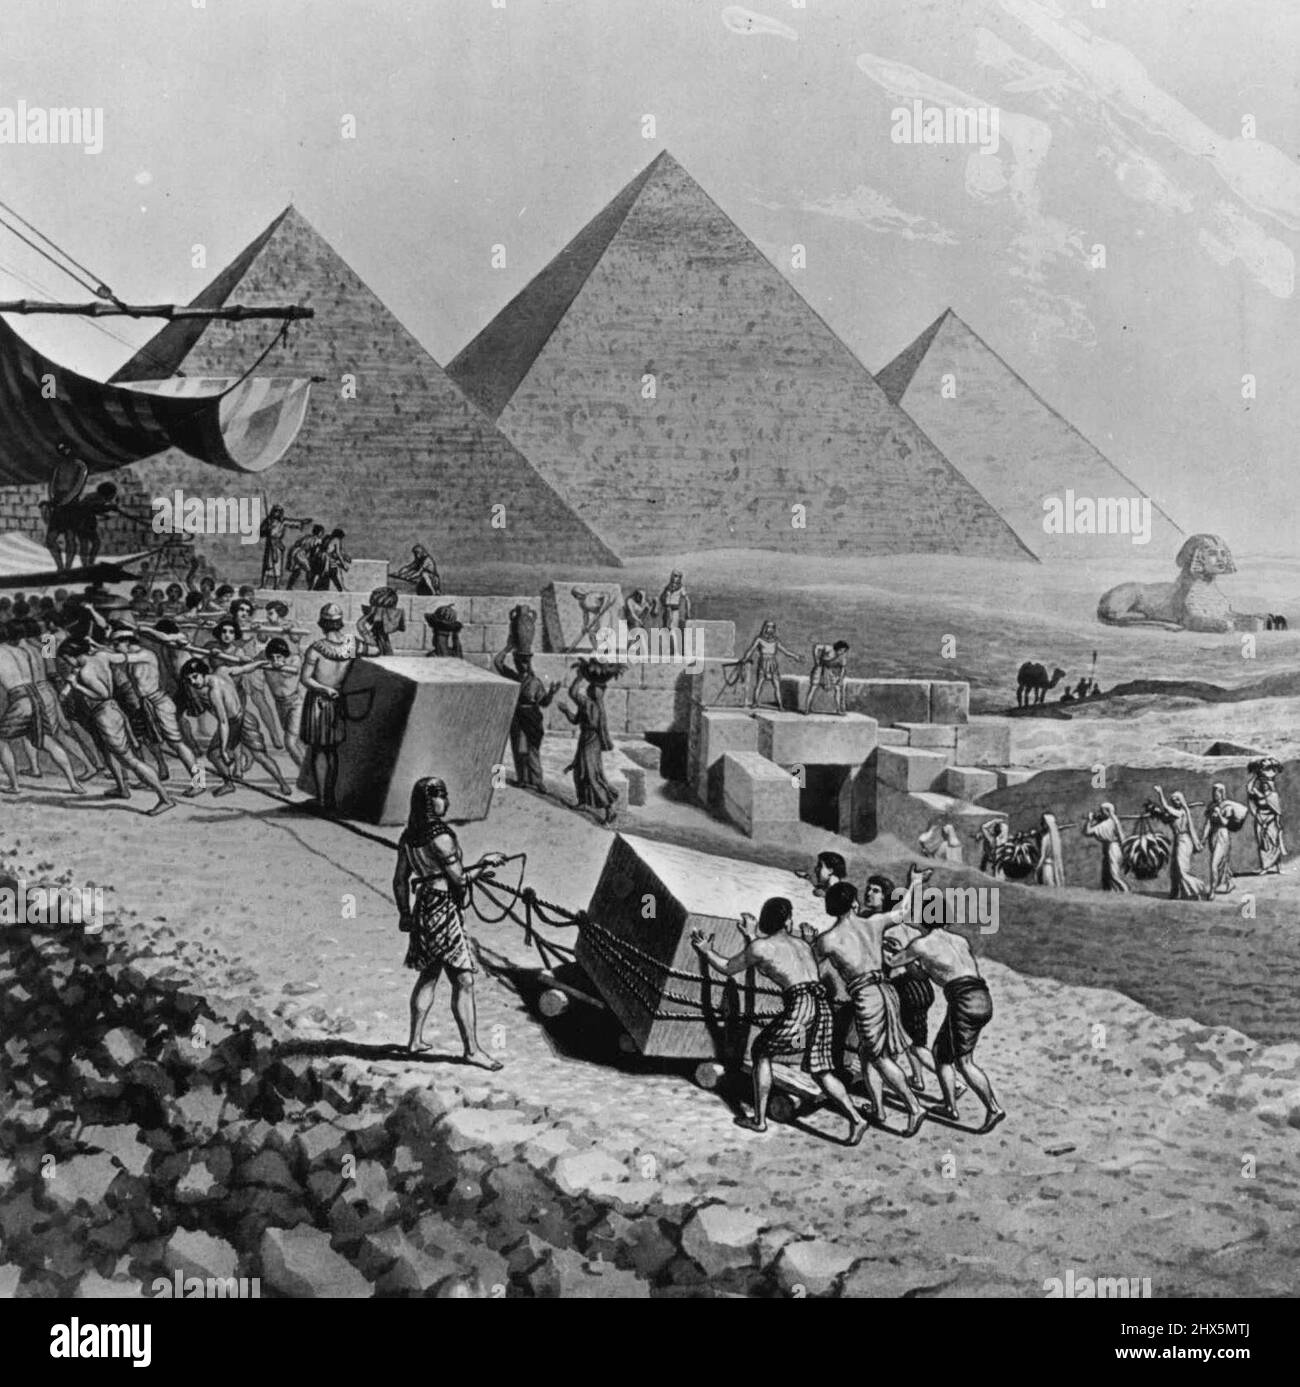 The Seven Wonders Of The World - Joseph Boggs Beale, American artist (1841-1926), here pictures his conception of the Seven Wonders of the Ancient World. Of these wonders, only the Pyramids of Egypt have survived. These drawings are from the modern Galleries in Philadelphia from whom the (name of paper) has obtained exclusive reproduction rights. The Great Pyramid Of Gizeh (center) is the largest of the Egyptian pyramids which comprise the only remaining Wonder of the Ancient World. At the right in this picture is the Sphinx, a crouching lion with a human head, cut from a single huge block of Stock Photo